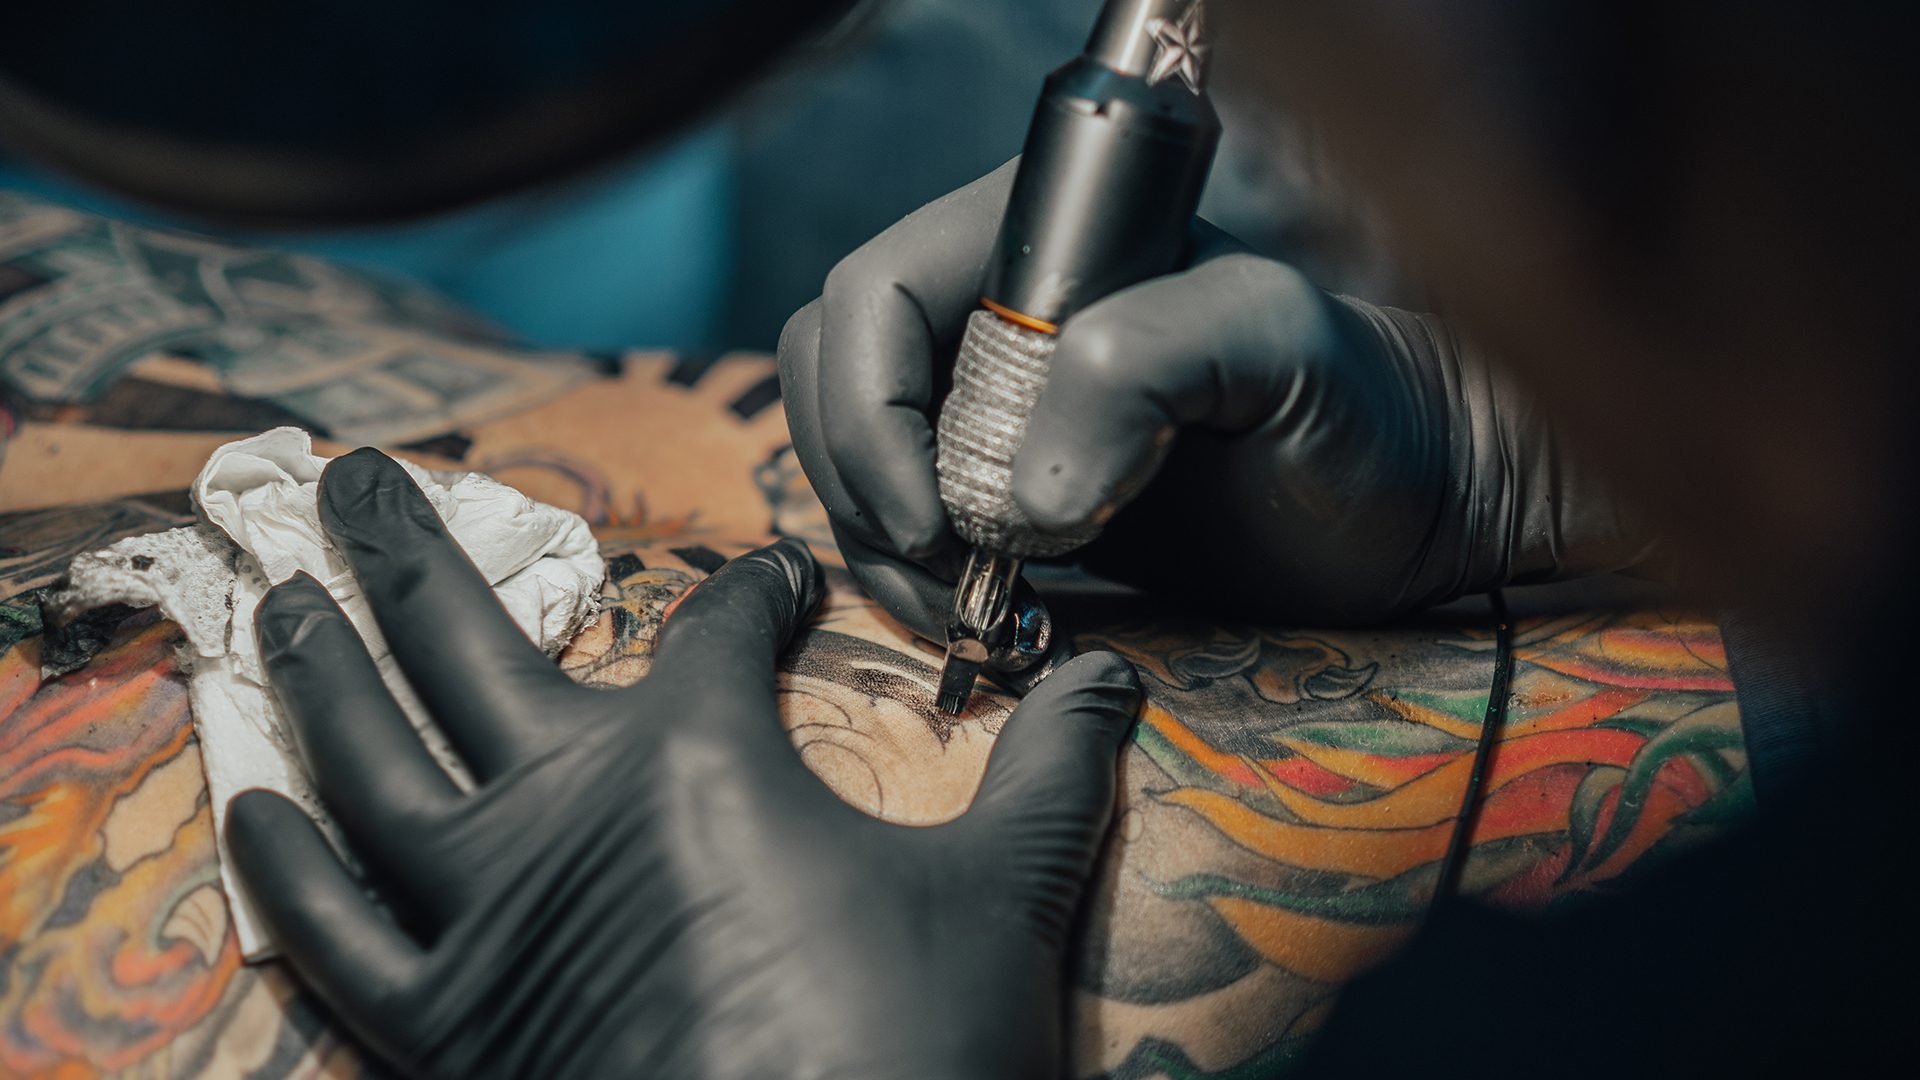 South Korean court upholds tattooing ban